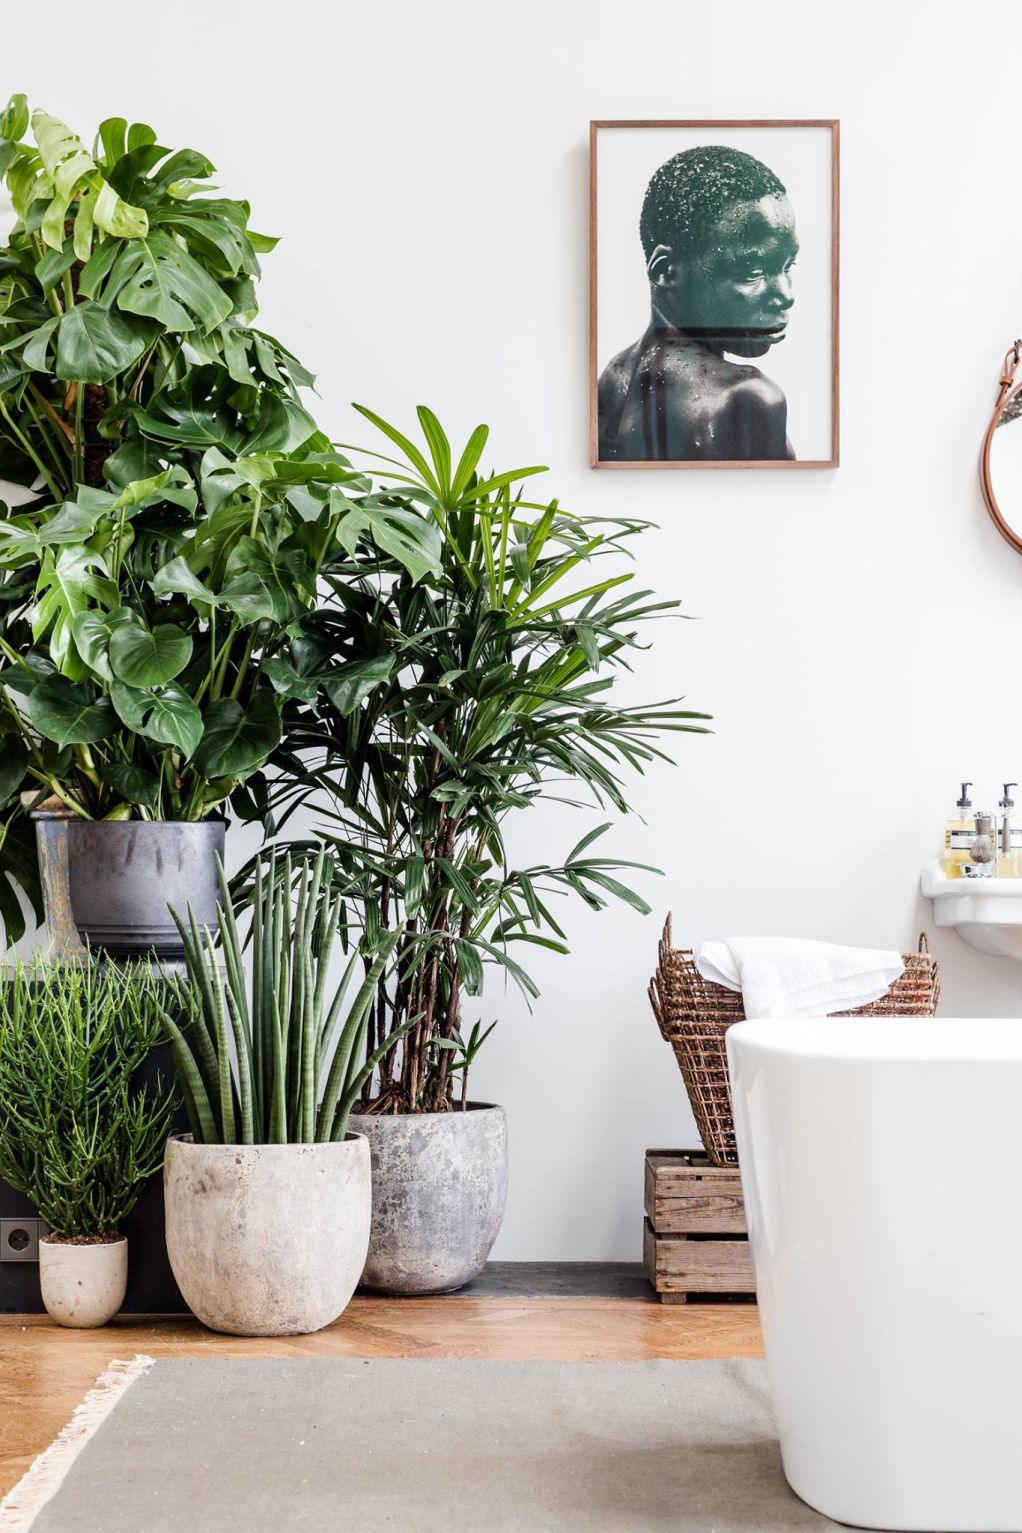 Going Green - How to care for your Indoor Plants